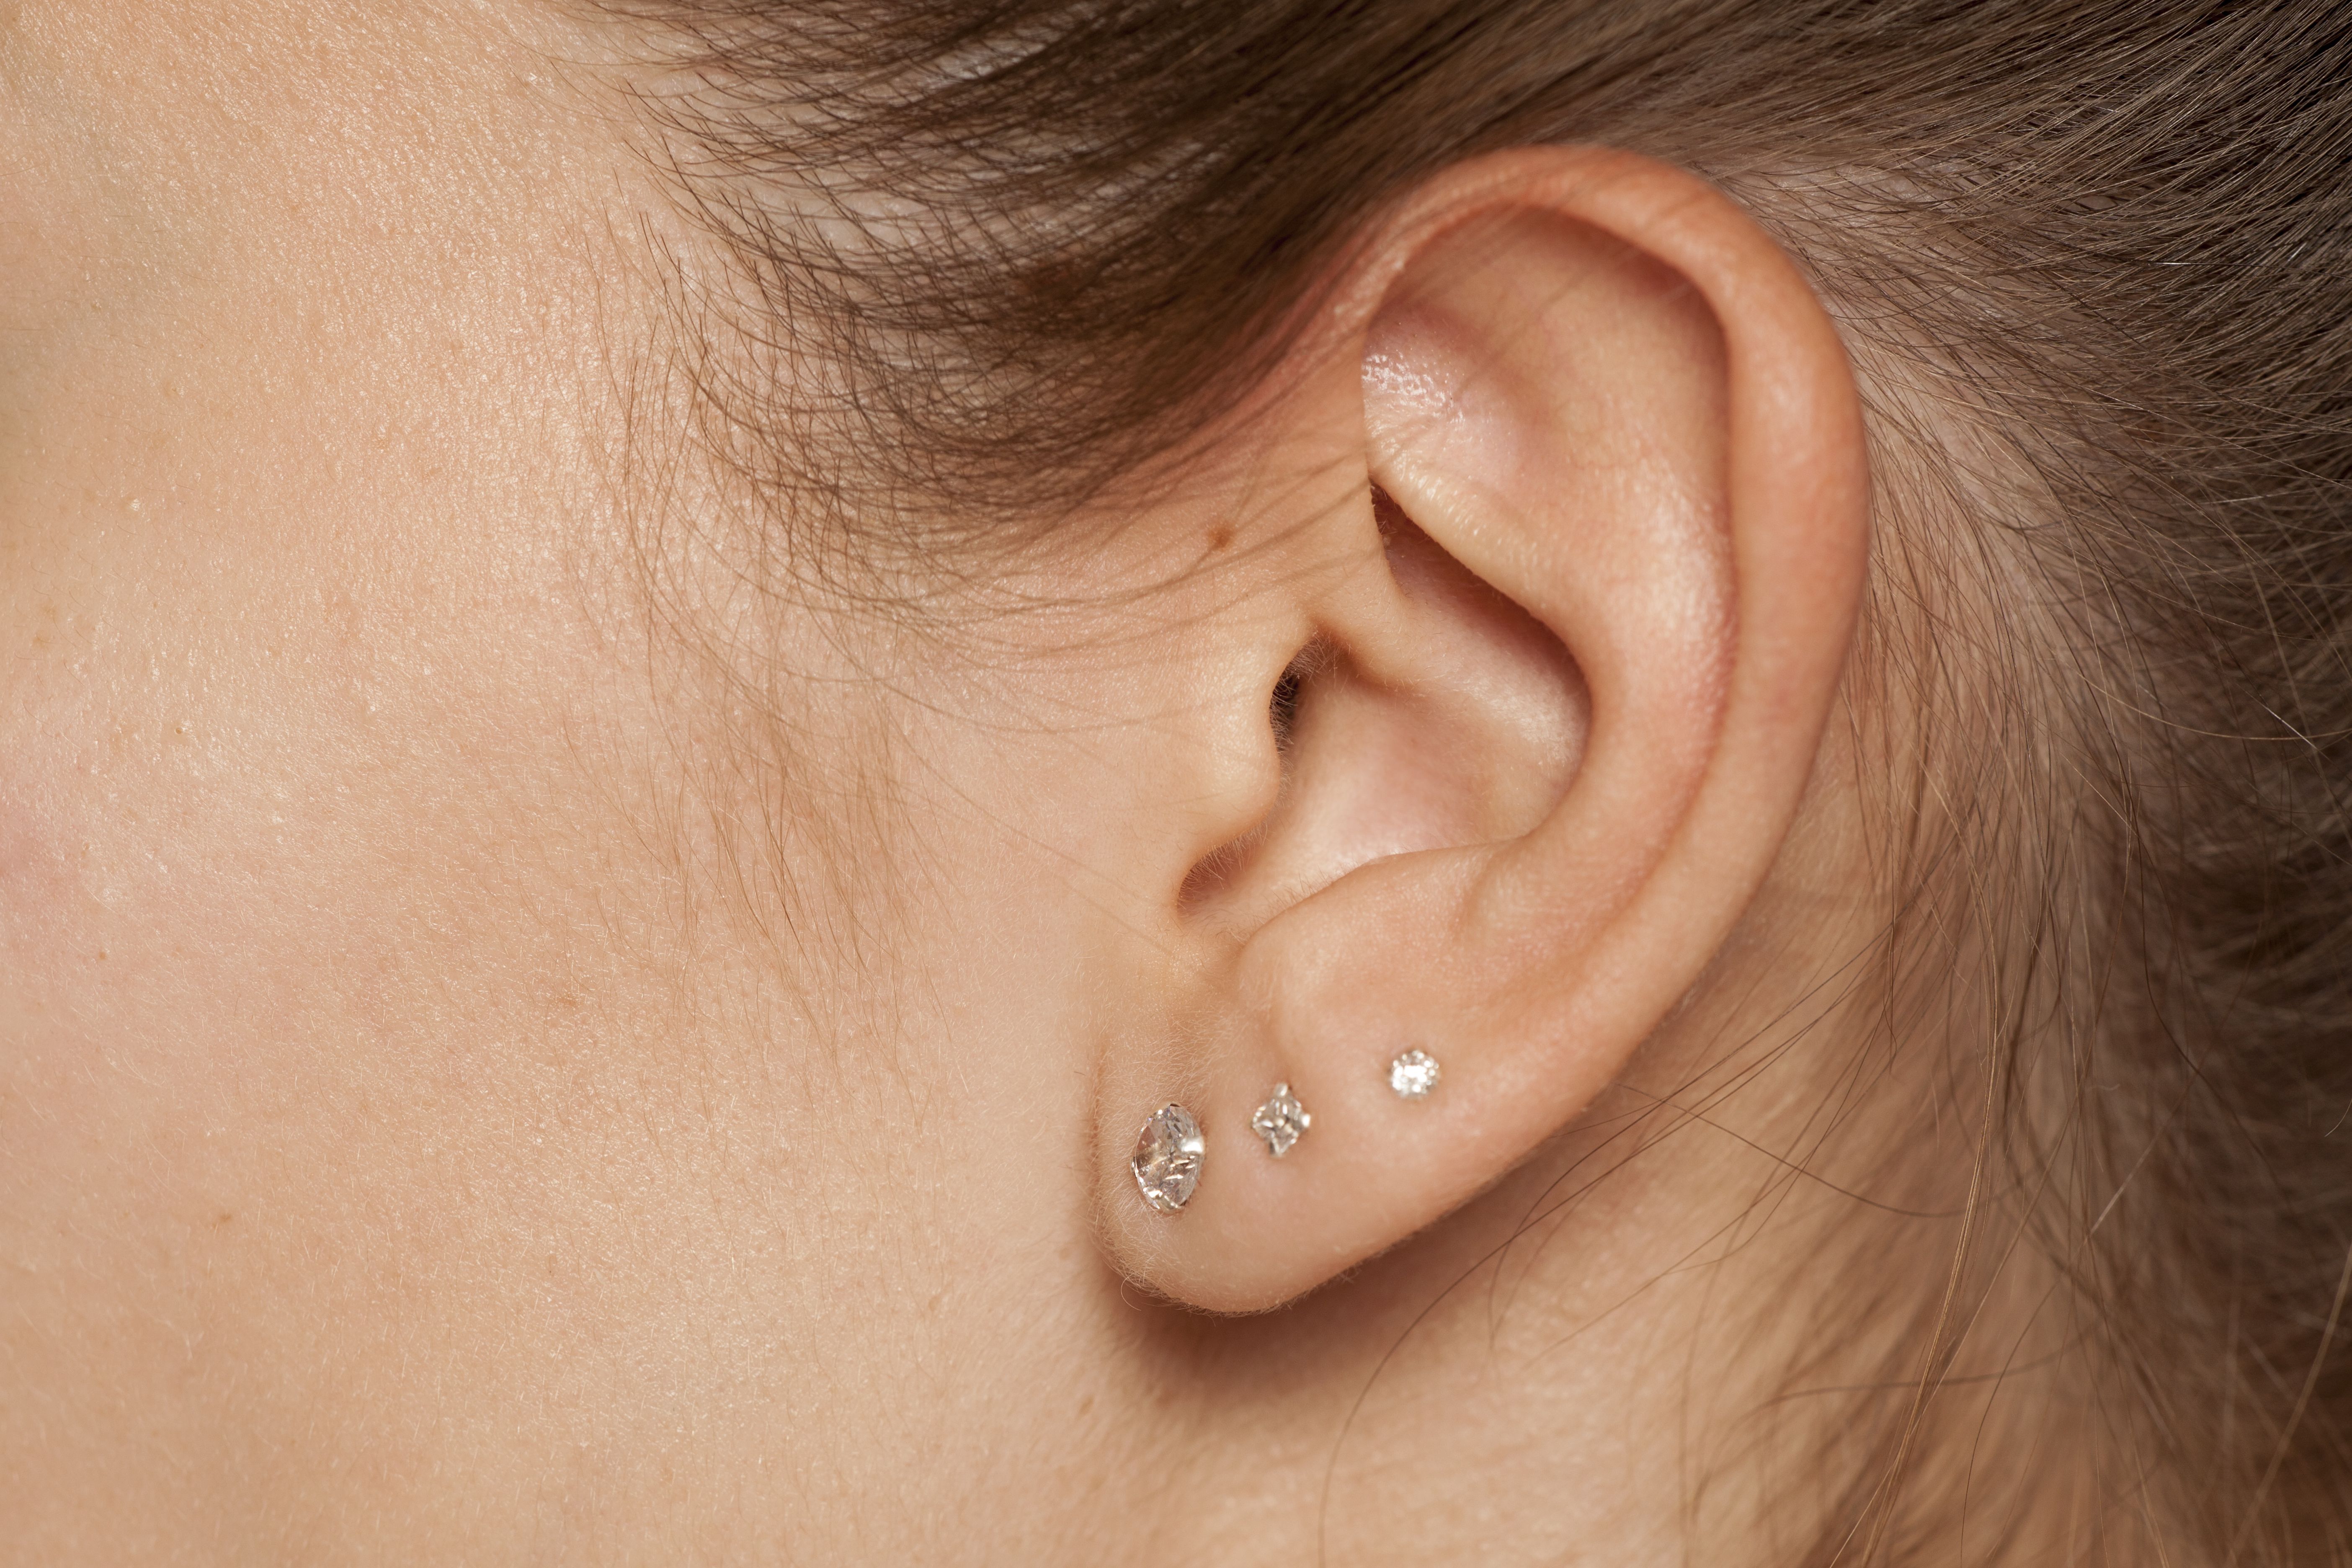 Industrial Piercing with Unique Earrings